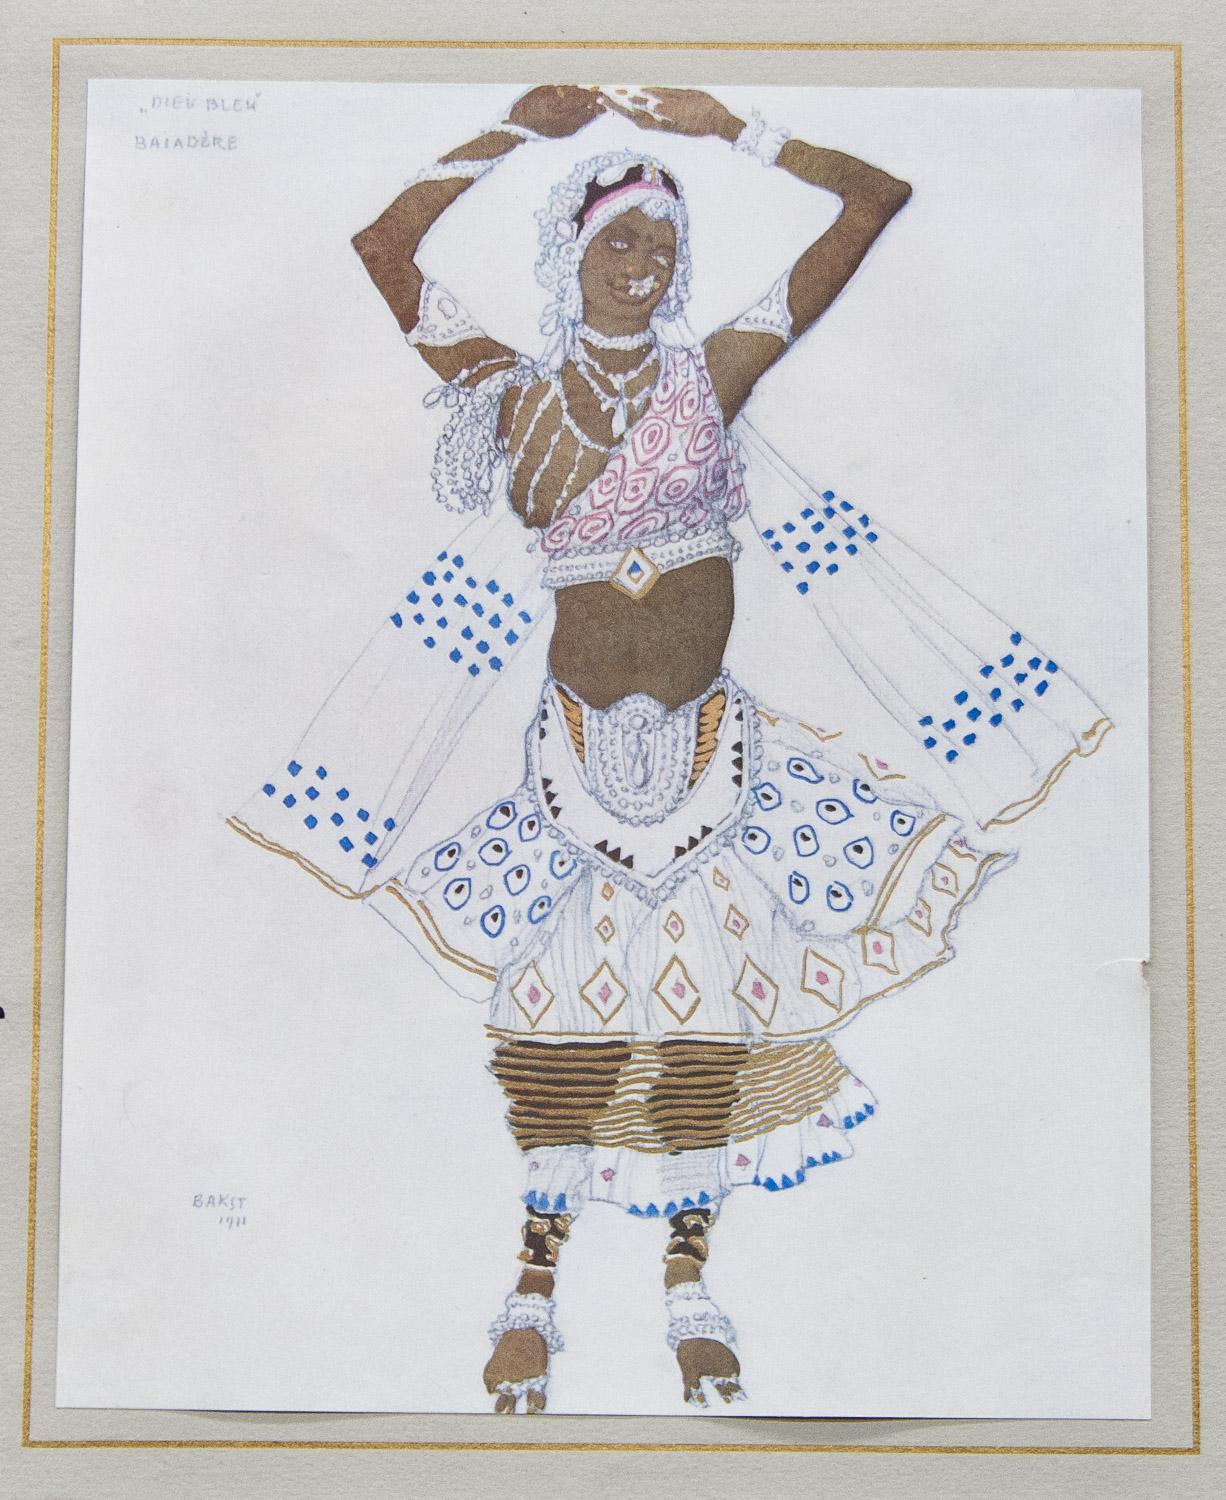          Three iconic Leon Bakst costume designs for Le Dieu Bleu ( The Blue God  ) a ballet choreographed by Michel Fokine and written by Cocteau. The ballet premiered in Paris in 1912. It tells the story of a girl who tries to dissuade her fiancé